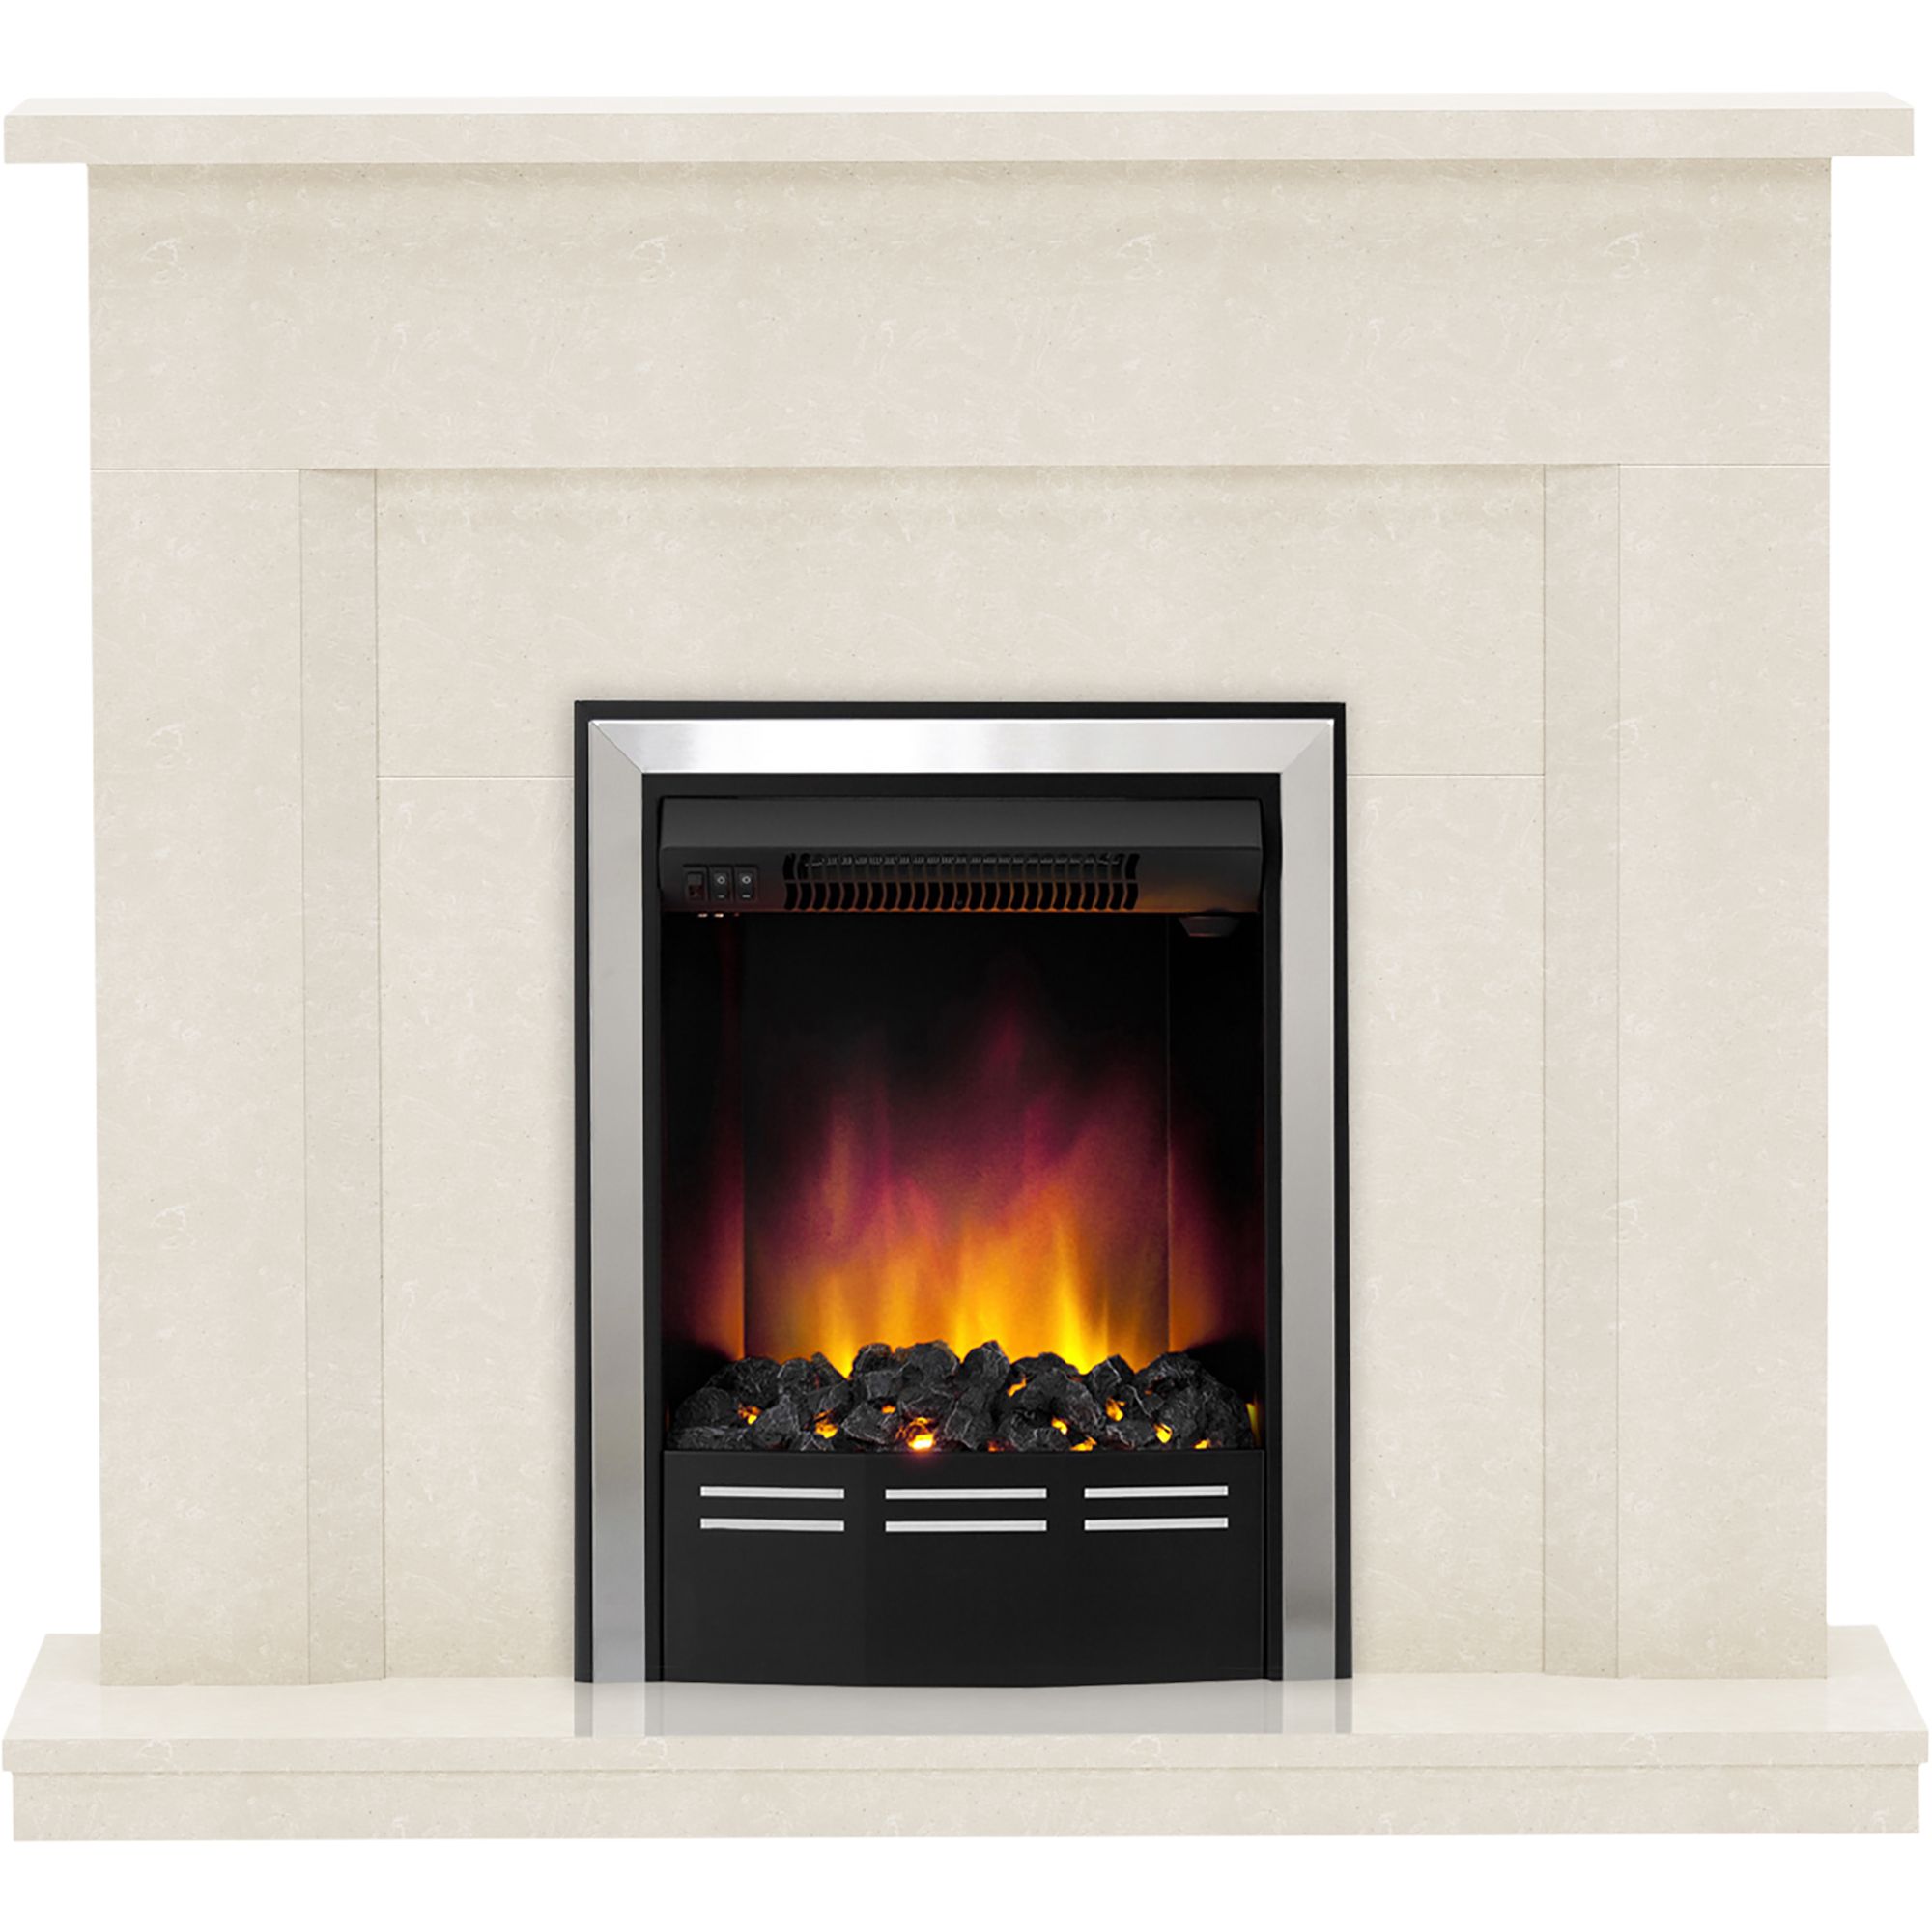 Be Modern Mariano Manila Micro Marble Chrome effect Electric Fire suite